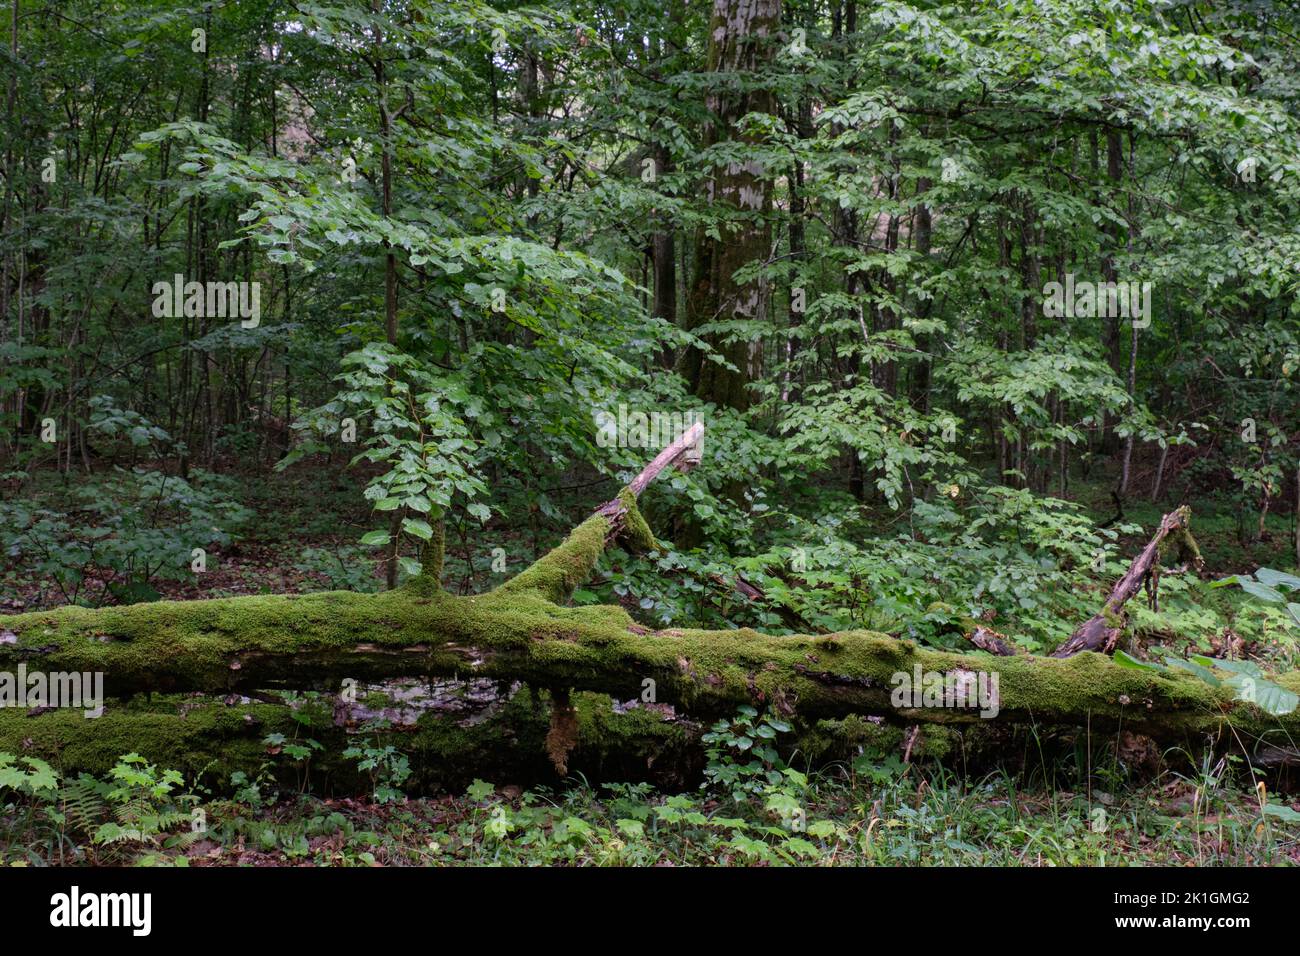 Party declined old oak branch and natural deciduous forest in summer,Bialowieza Forest, Poland, Europe Stock Photo